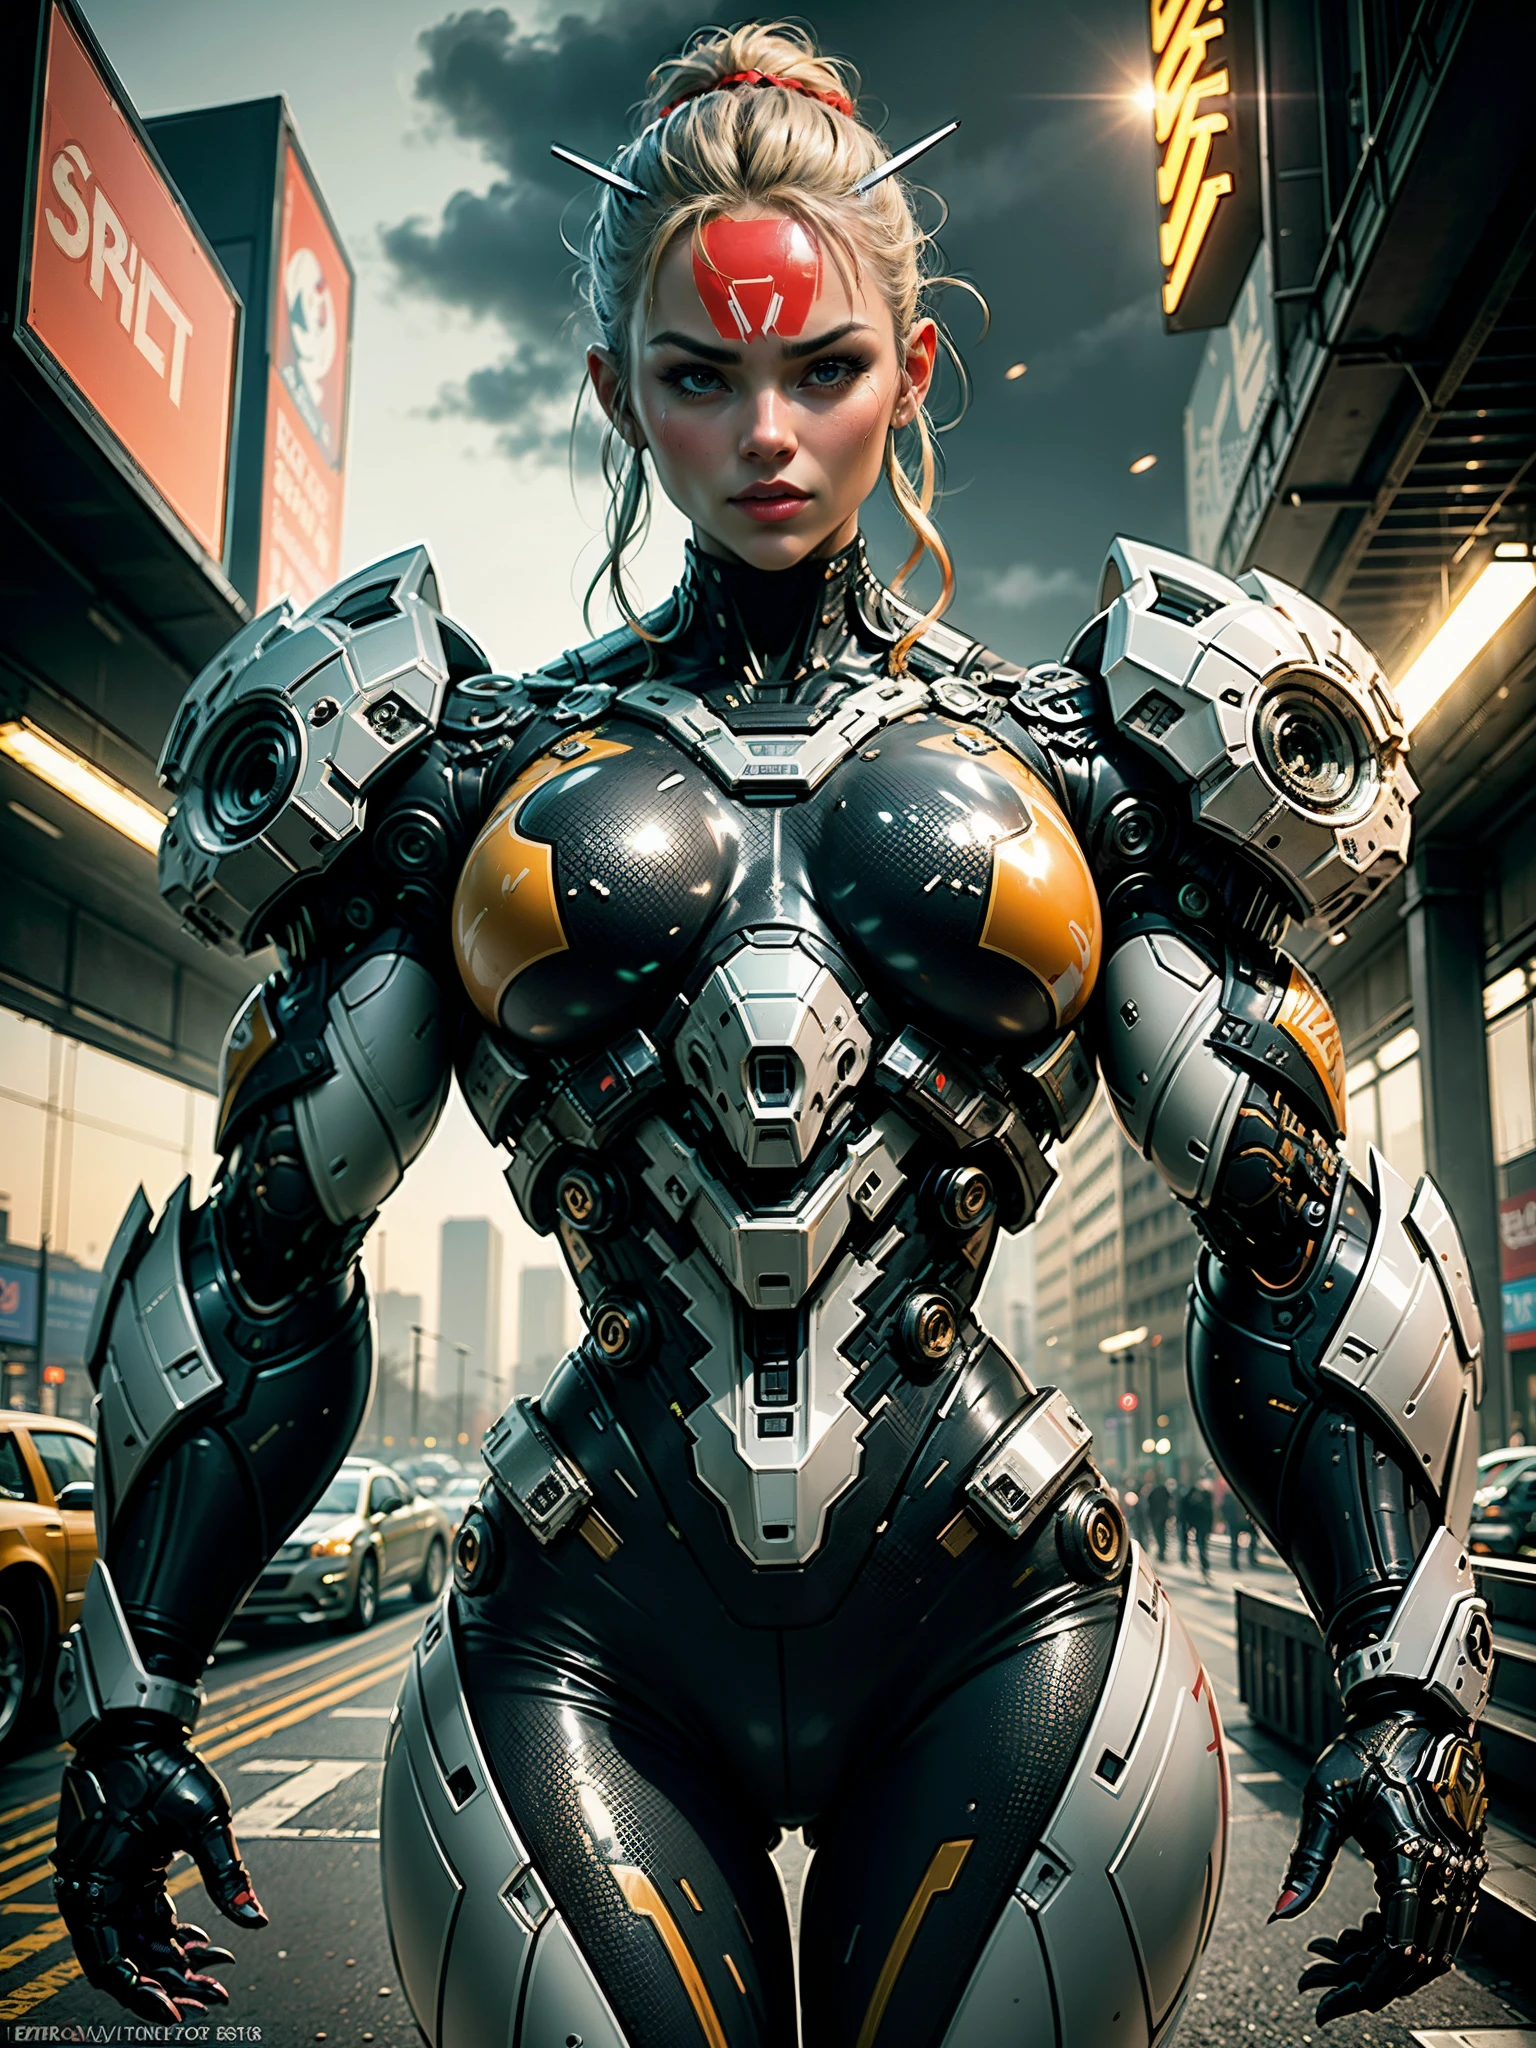 (1girl:1.5), Cinematic, hyper-detailed, and insanely detailed, this artwork captures the essence of a hairless muscular female android girl. Beautiful color grading, enhancing the overall cinematic feel. Unreal Engine brings her anatomic cybernetic muscle suit to life, appearing even more mesmerizing. With the use of depth of field (DOF), every detail is focused and accentuated, drawing attention to her eyes and the intricate design of the anatomic cybernetic muscle suit . The image resolution is at its peak, utilizing super-resolution technology to ensure every pixel is perfect. Cinematic lighting enhances her aura, while anti-aliasing techniques like FXAA and TXAA keep the edges smooth and clean. Adding realism to the anatomic cybernetic muscle suit, RTX technology enables ray tracing. Additionally, SSAO (Screen Space Ambient Occlusion) gives depth and realism to the scene, the girl's anatomic cybernetic muscle suit become even more convincing. In the post-processing and post-production stages, tone mapping enhances the colors, creating a captivating visual experience. The integration of CGI (Computer-Generated Imagery) and VFX (Visual Effect brings out the anatomic cybernetic muscle suit's intricate features in a seamless manner. SFX (Sound Effects) complement the visual artistry, immersing the viewer further into this fantastic world. The level of detail is awe-inspiring, with intricate elements meticulously crafted, the artwork hyper maximalist and hyper-realistic. Volumetric effects add depth and dimension, and the photorealism is unparalleled. The image is rendered in 8K resolution, ensuring super-detailed visuals. The volumetric lightning adds a touch of magic, highlighting her beauty and the aura of her anatomic cybernetic muscle suit in an otherworldly way. High Dynamic Range (HDR) technology makes the colors pop, adding richness to the overall composition. Ultimately, this artwork presents an unreal portrayal of a super muscled cybernetic female android